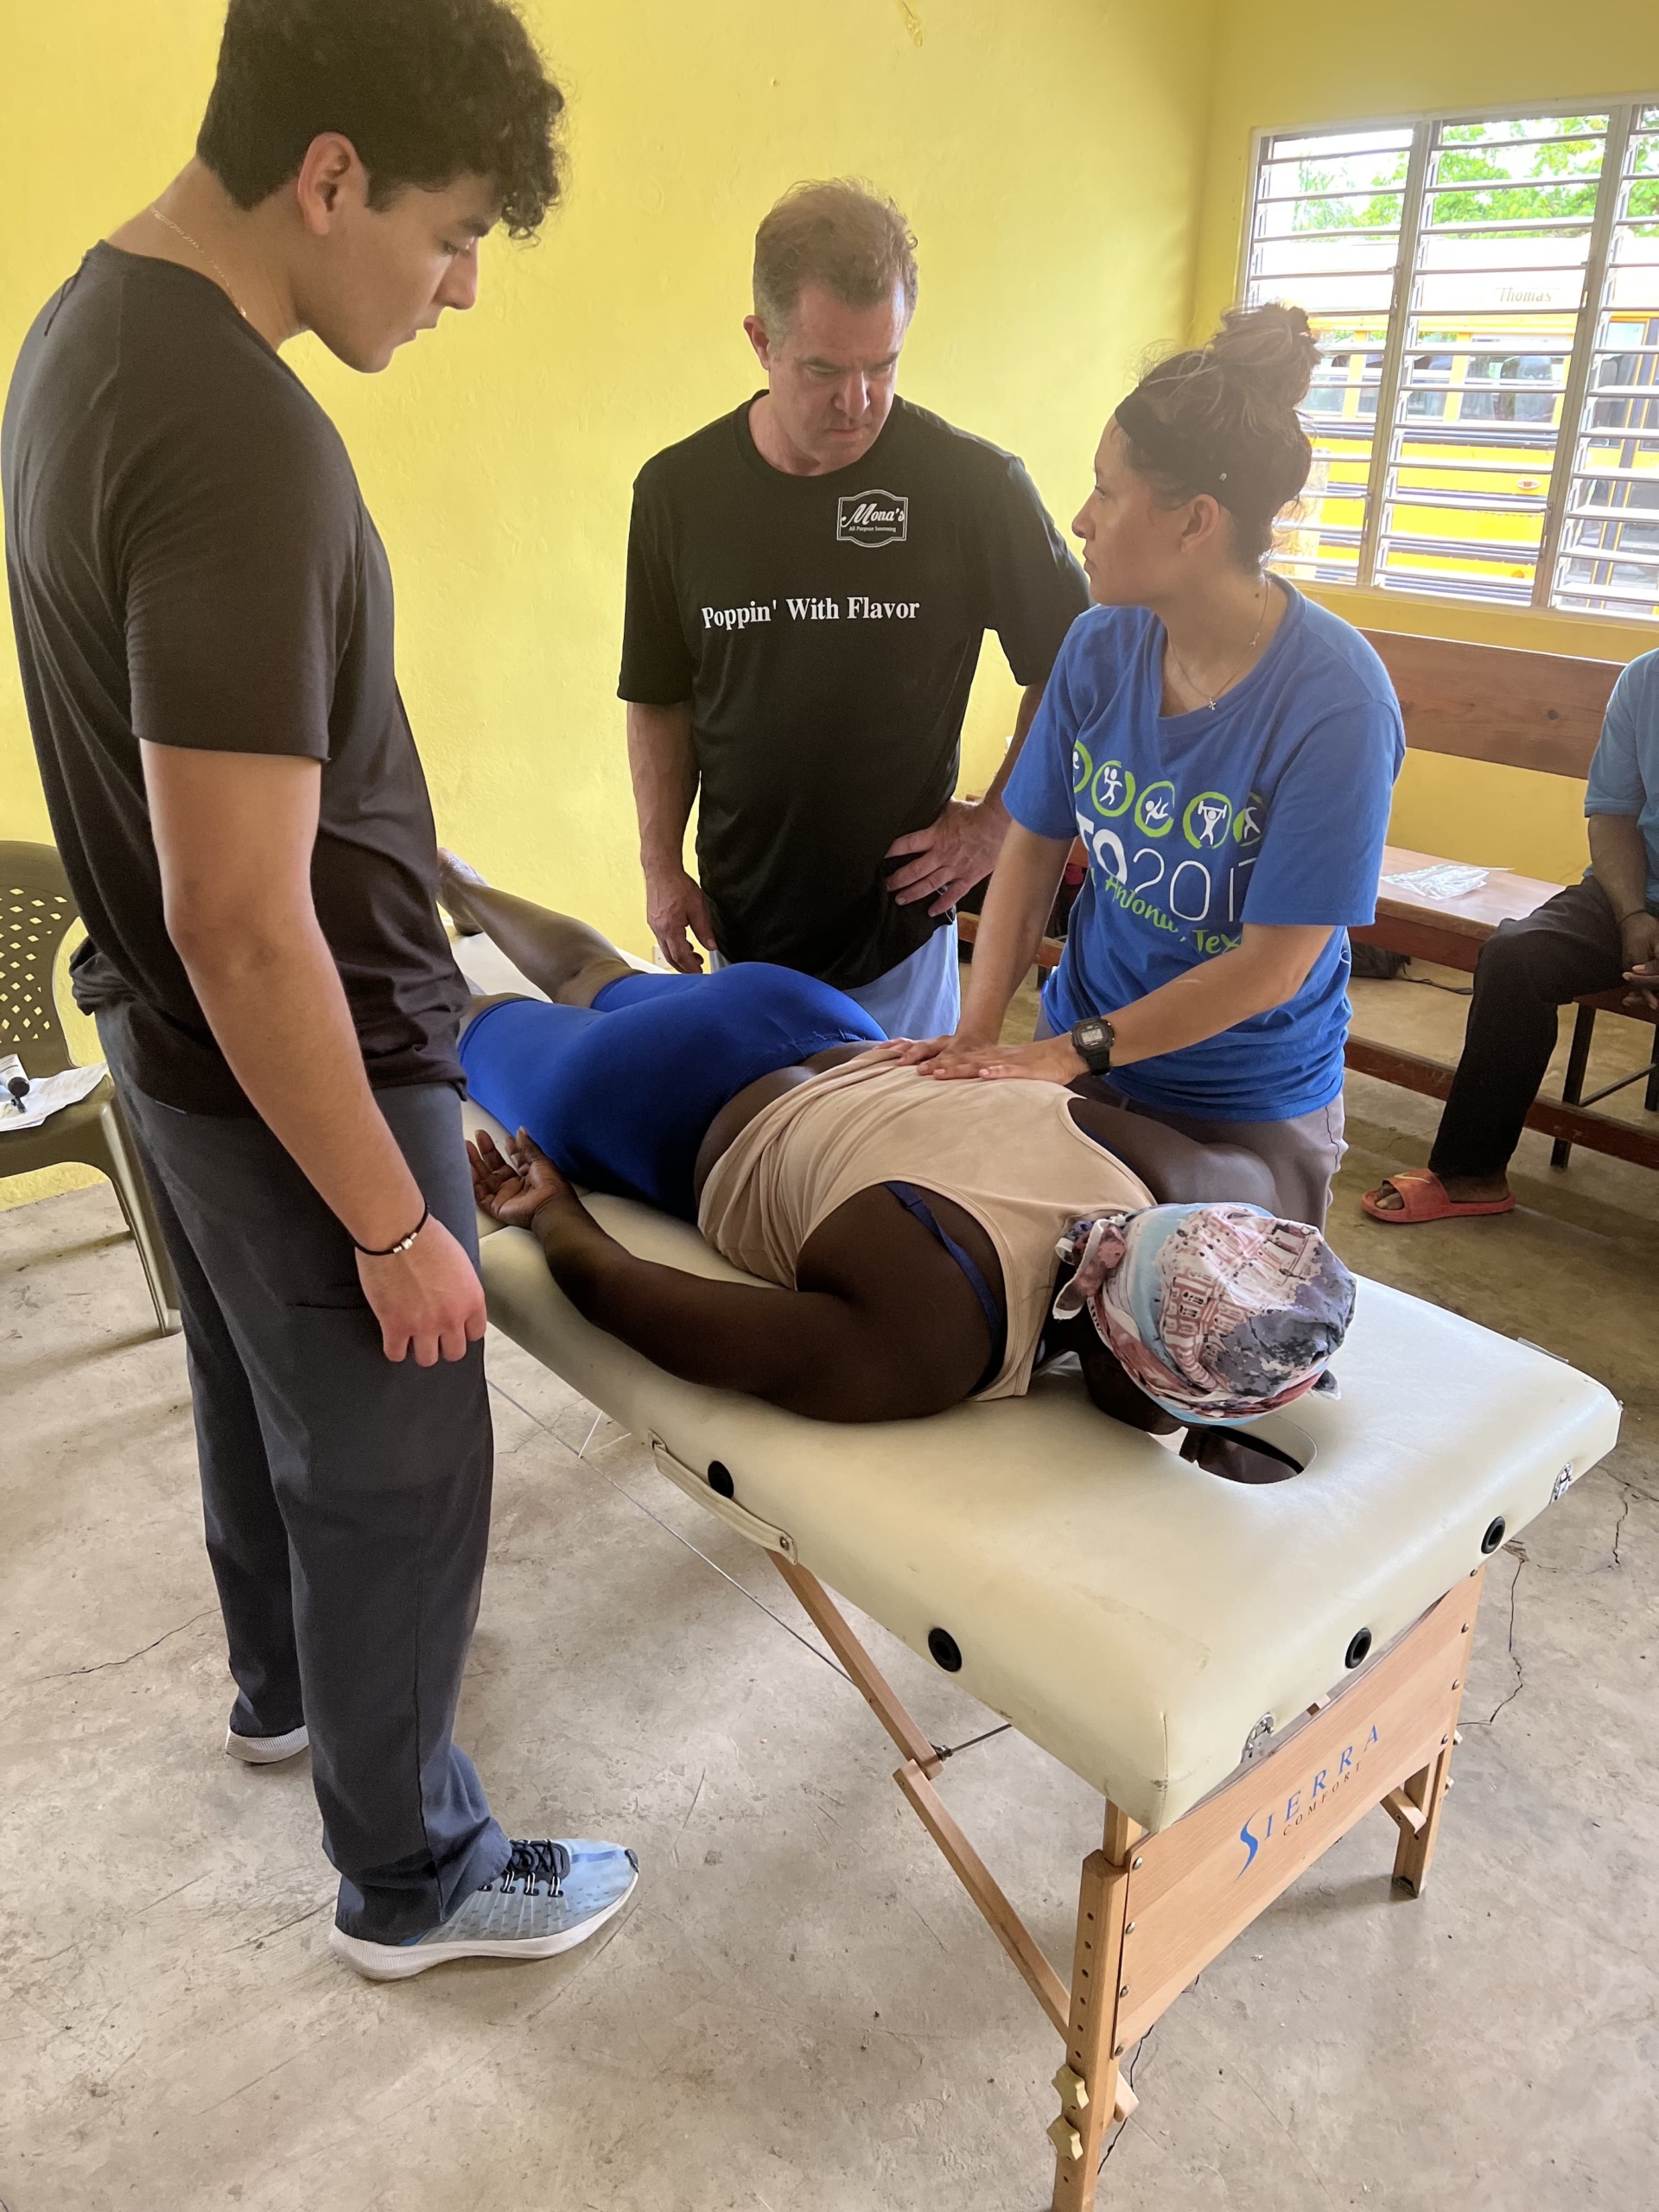 momentum staff members performing physical therapy on a patient laying on the table